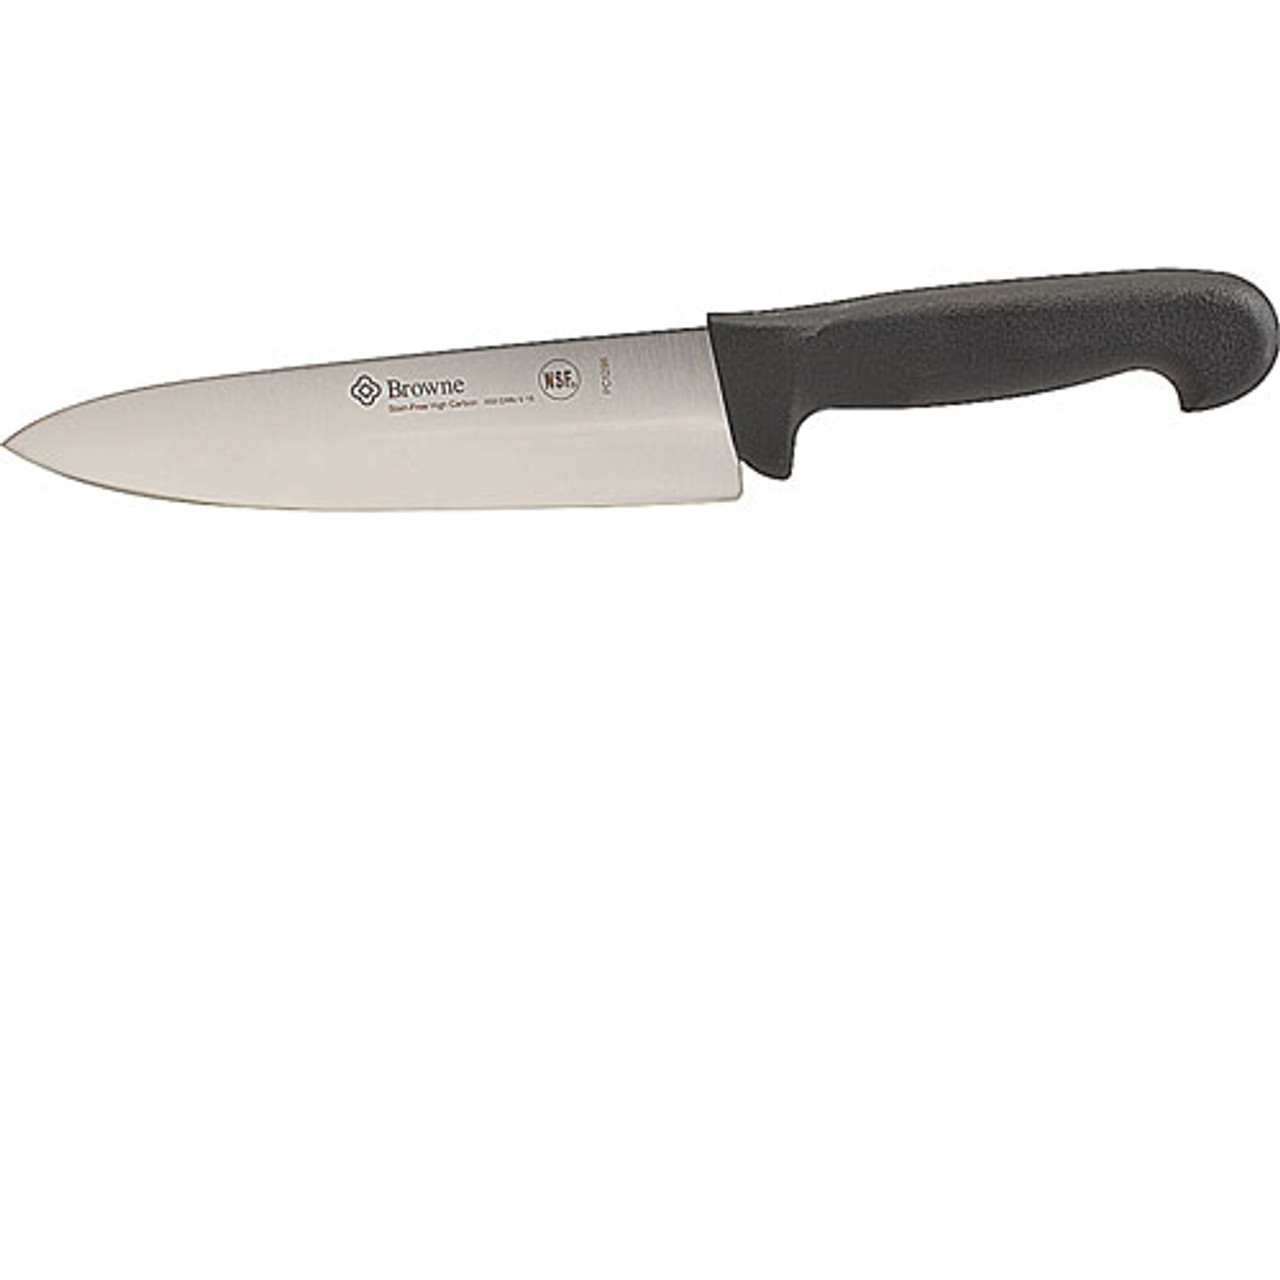 Knife,8" Cook'S , Blk Plst Hdl - Replacement Part For AllPoints 1371048